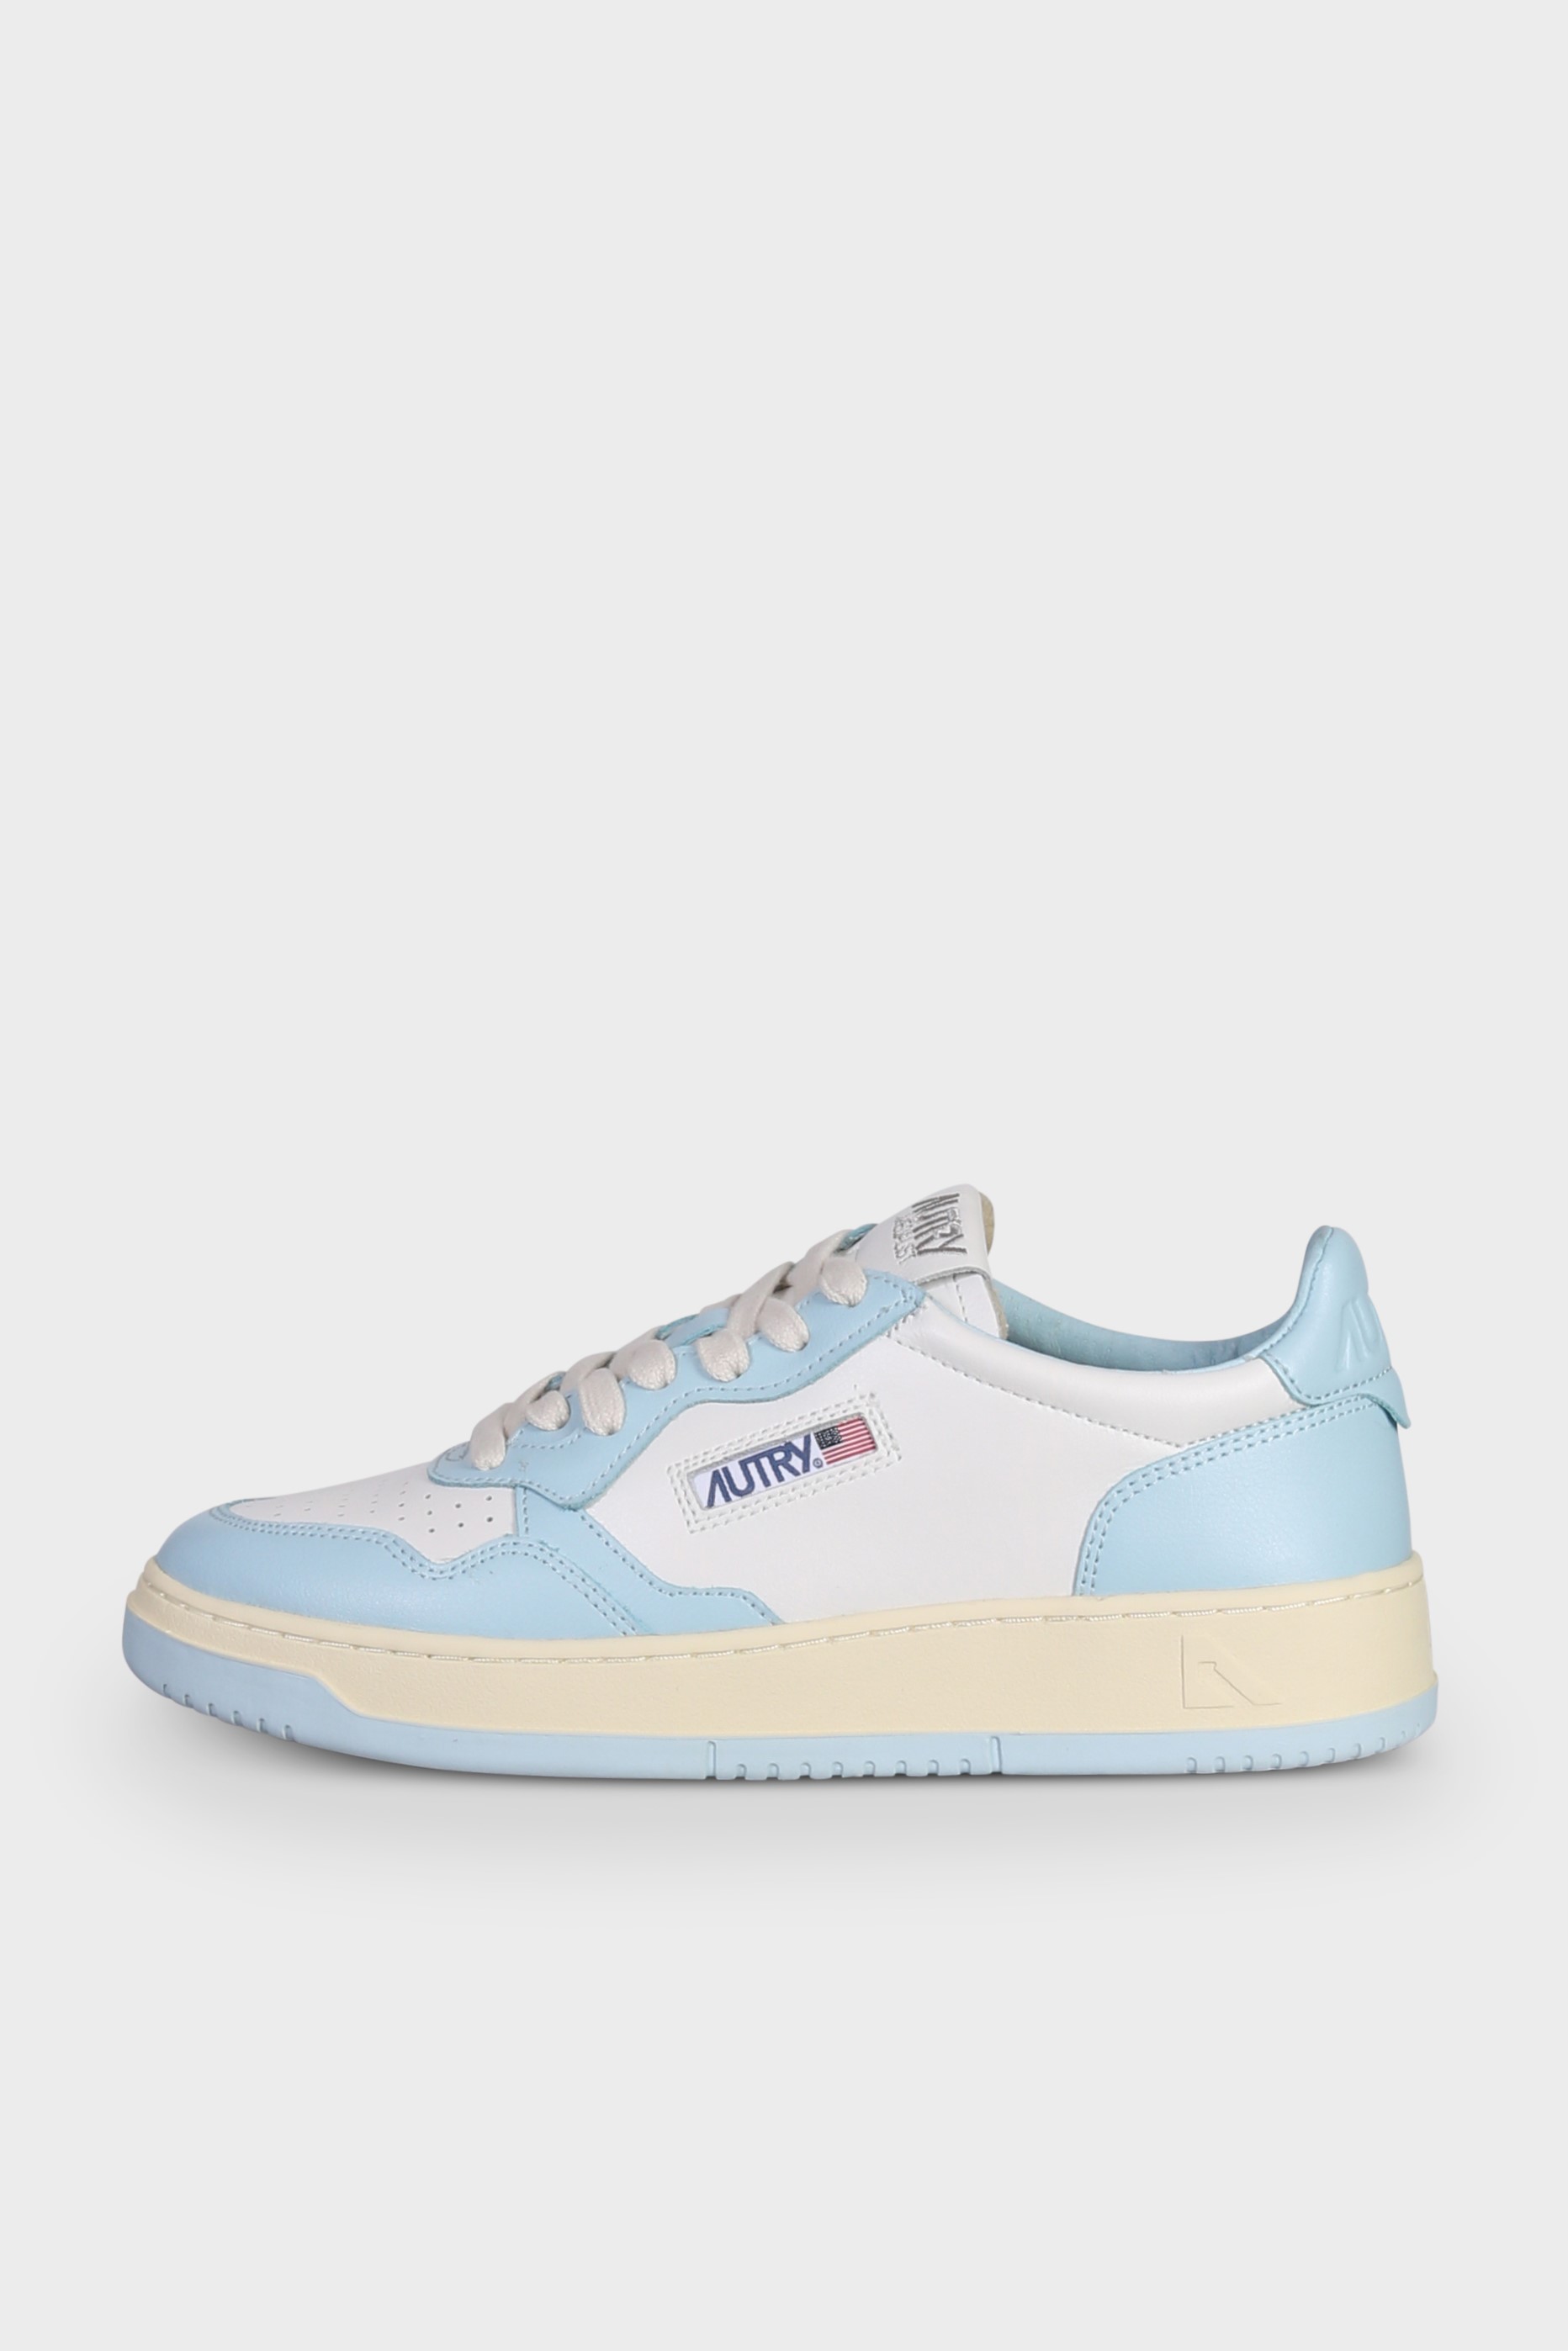 AUTRY ACTION SHOES Low Sneaker White/Stream Blue